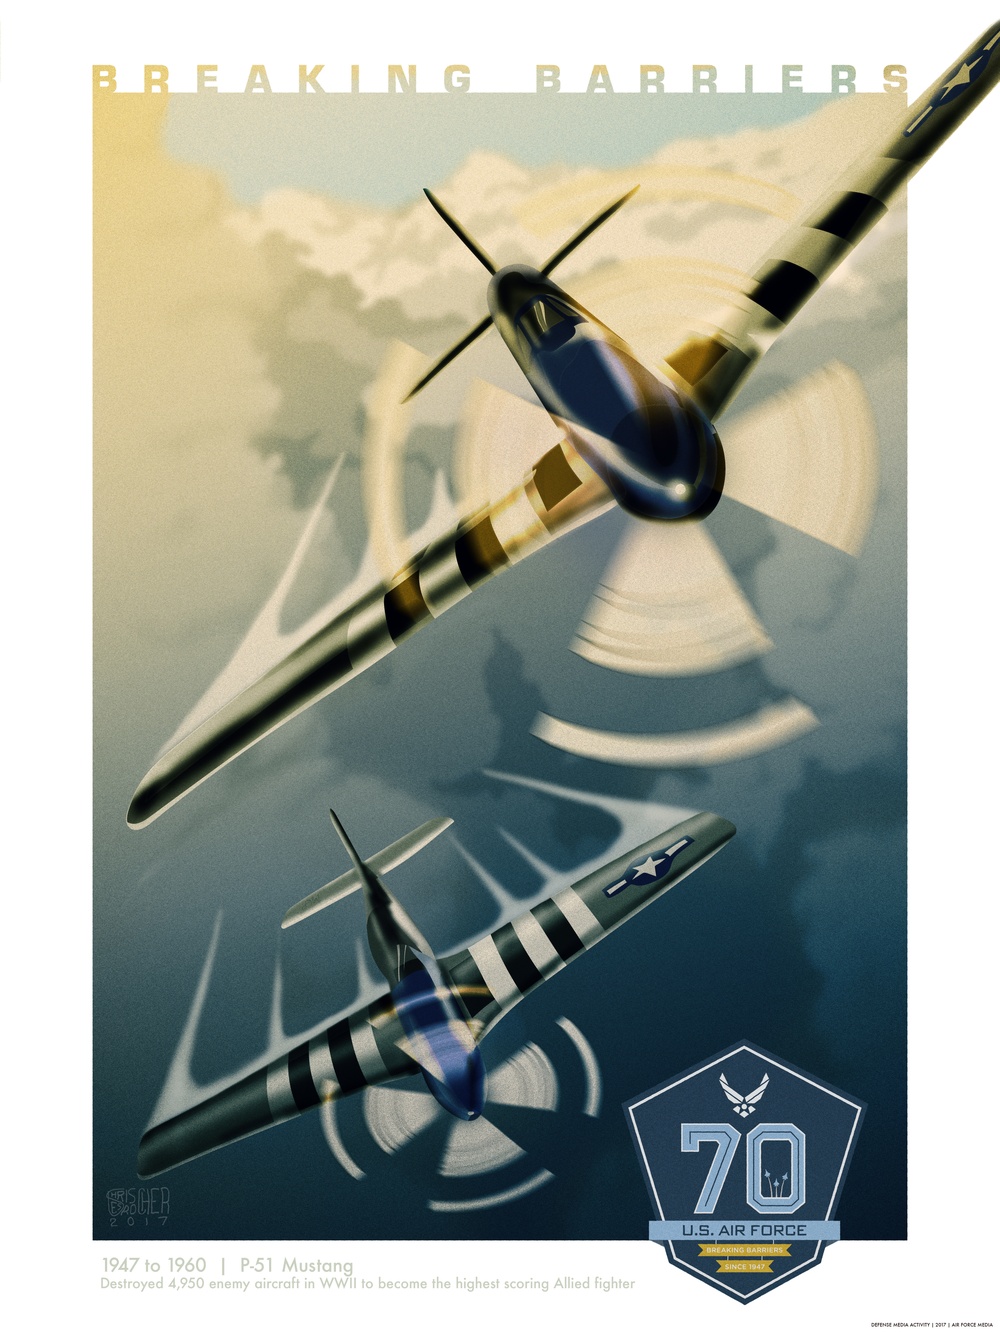 DVIDS - Images - USAF 70th Birthday: 1947 to 1960 (poster 1 of 8)